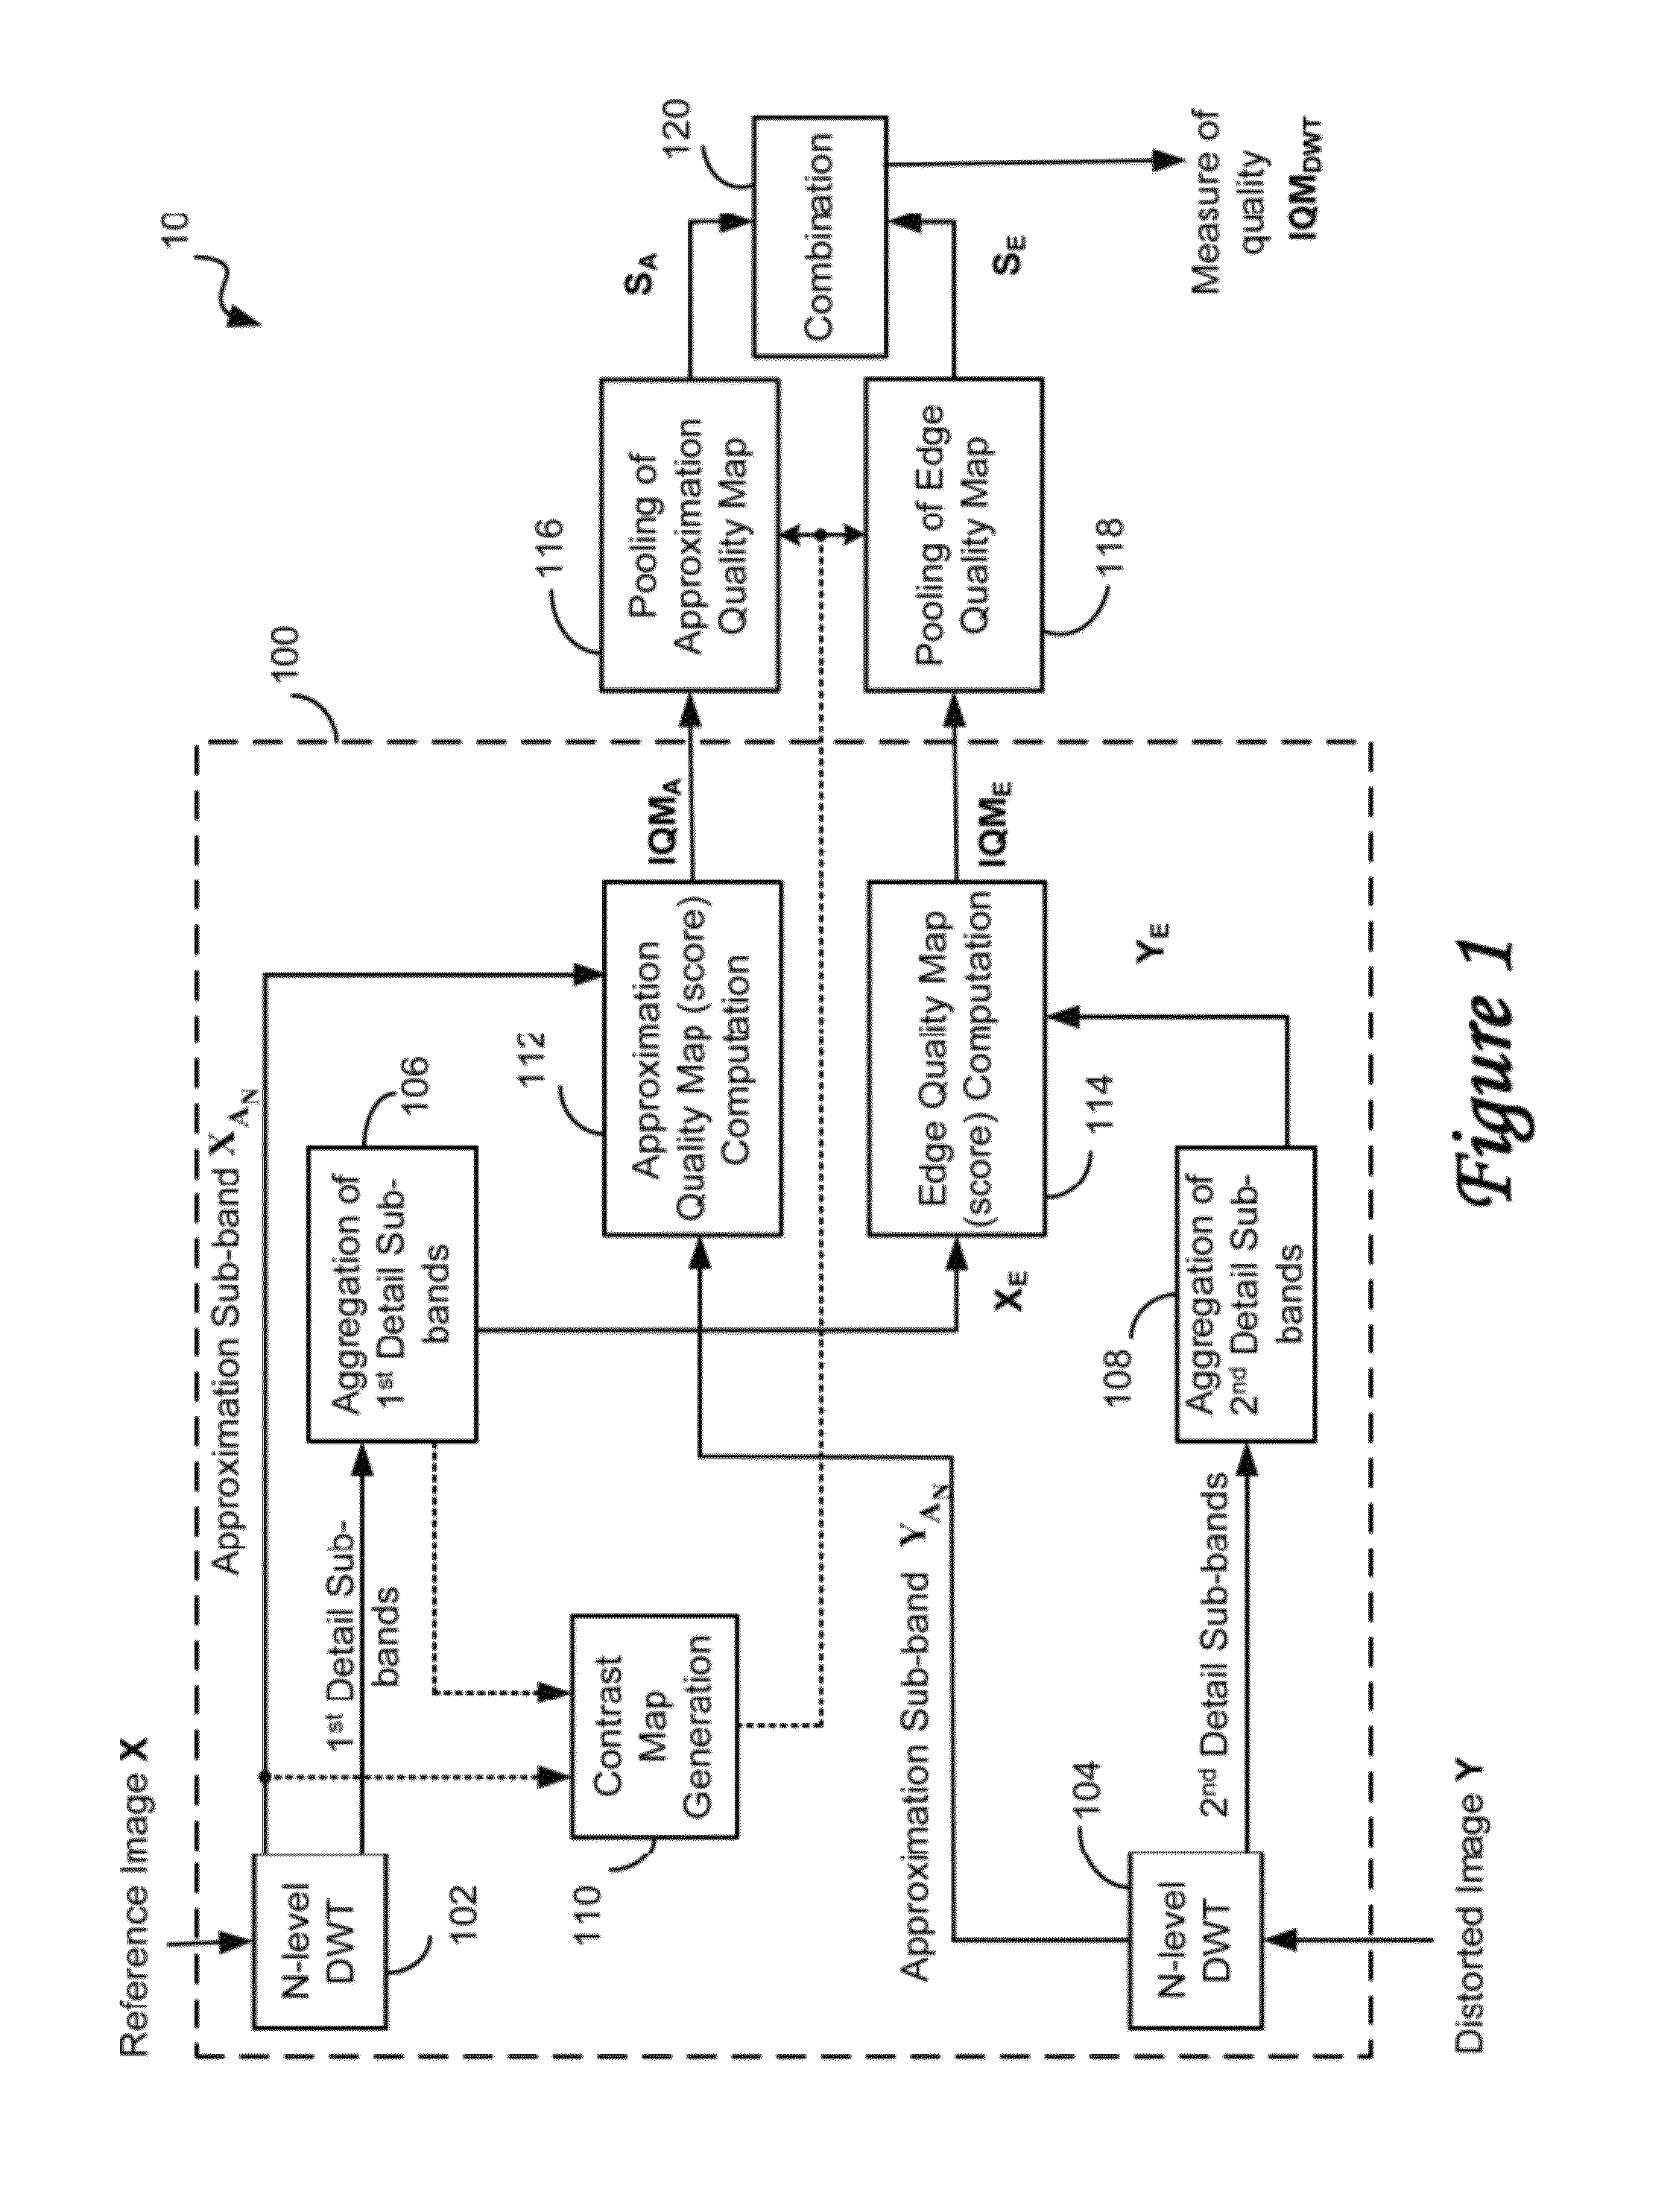 Method and system for increasing robustness of visual quality metrics using spatial shifting